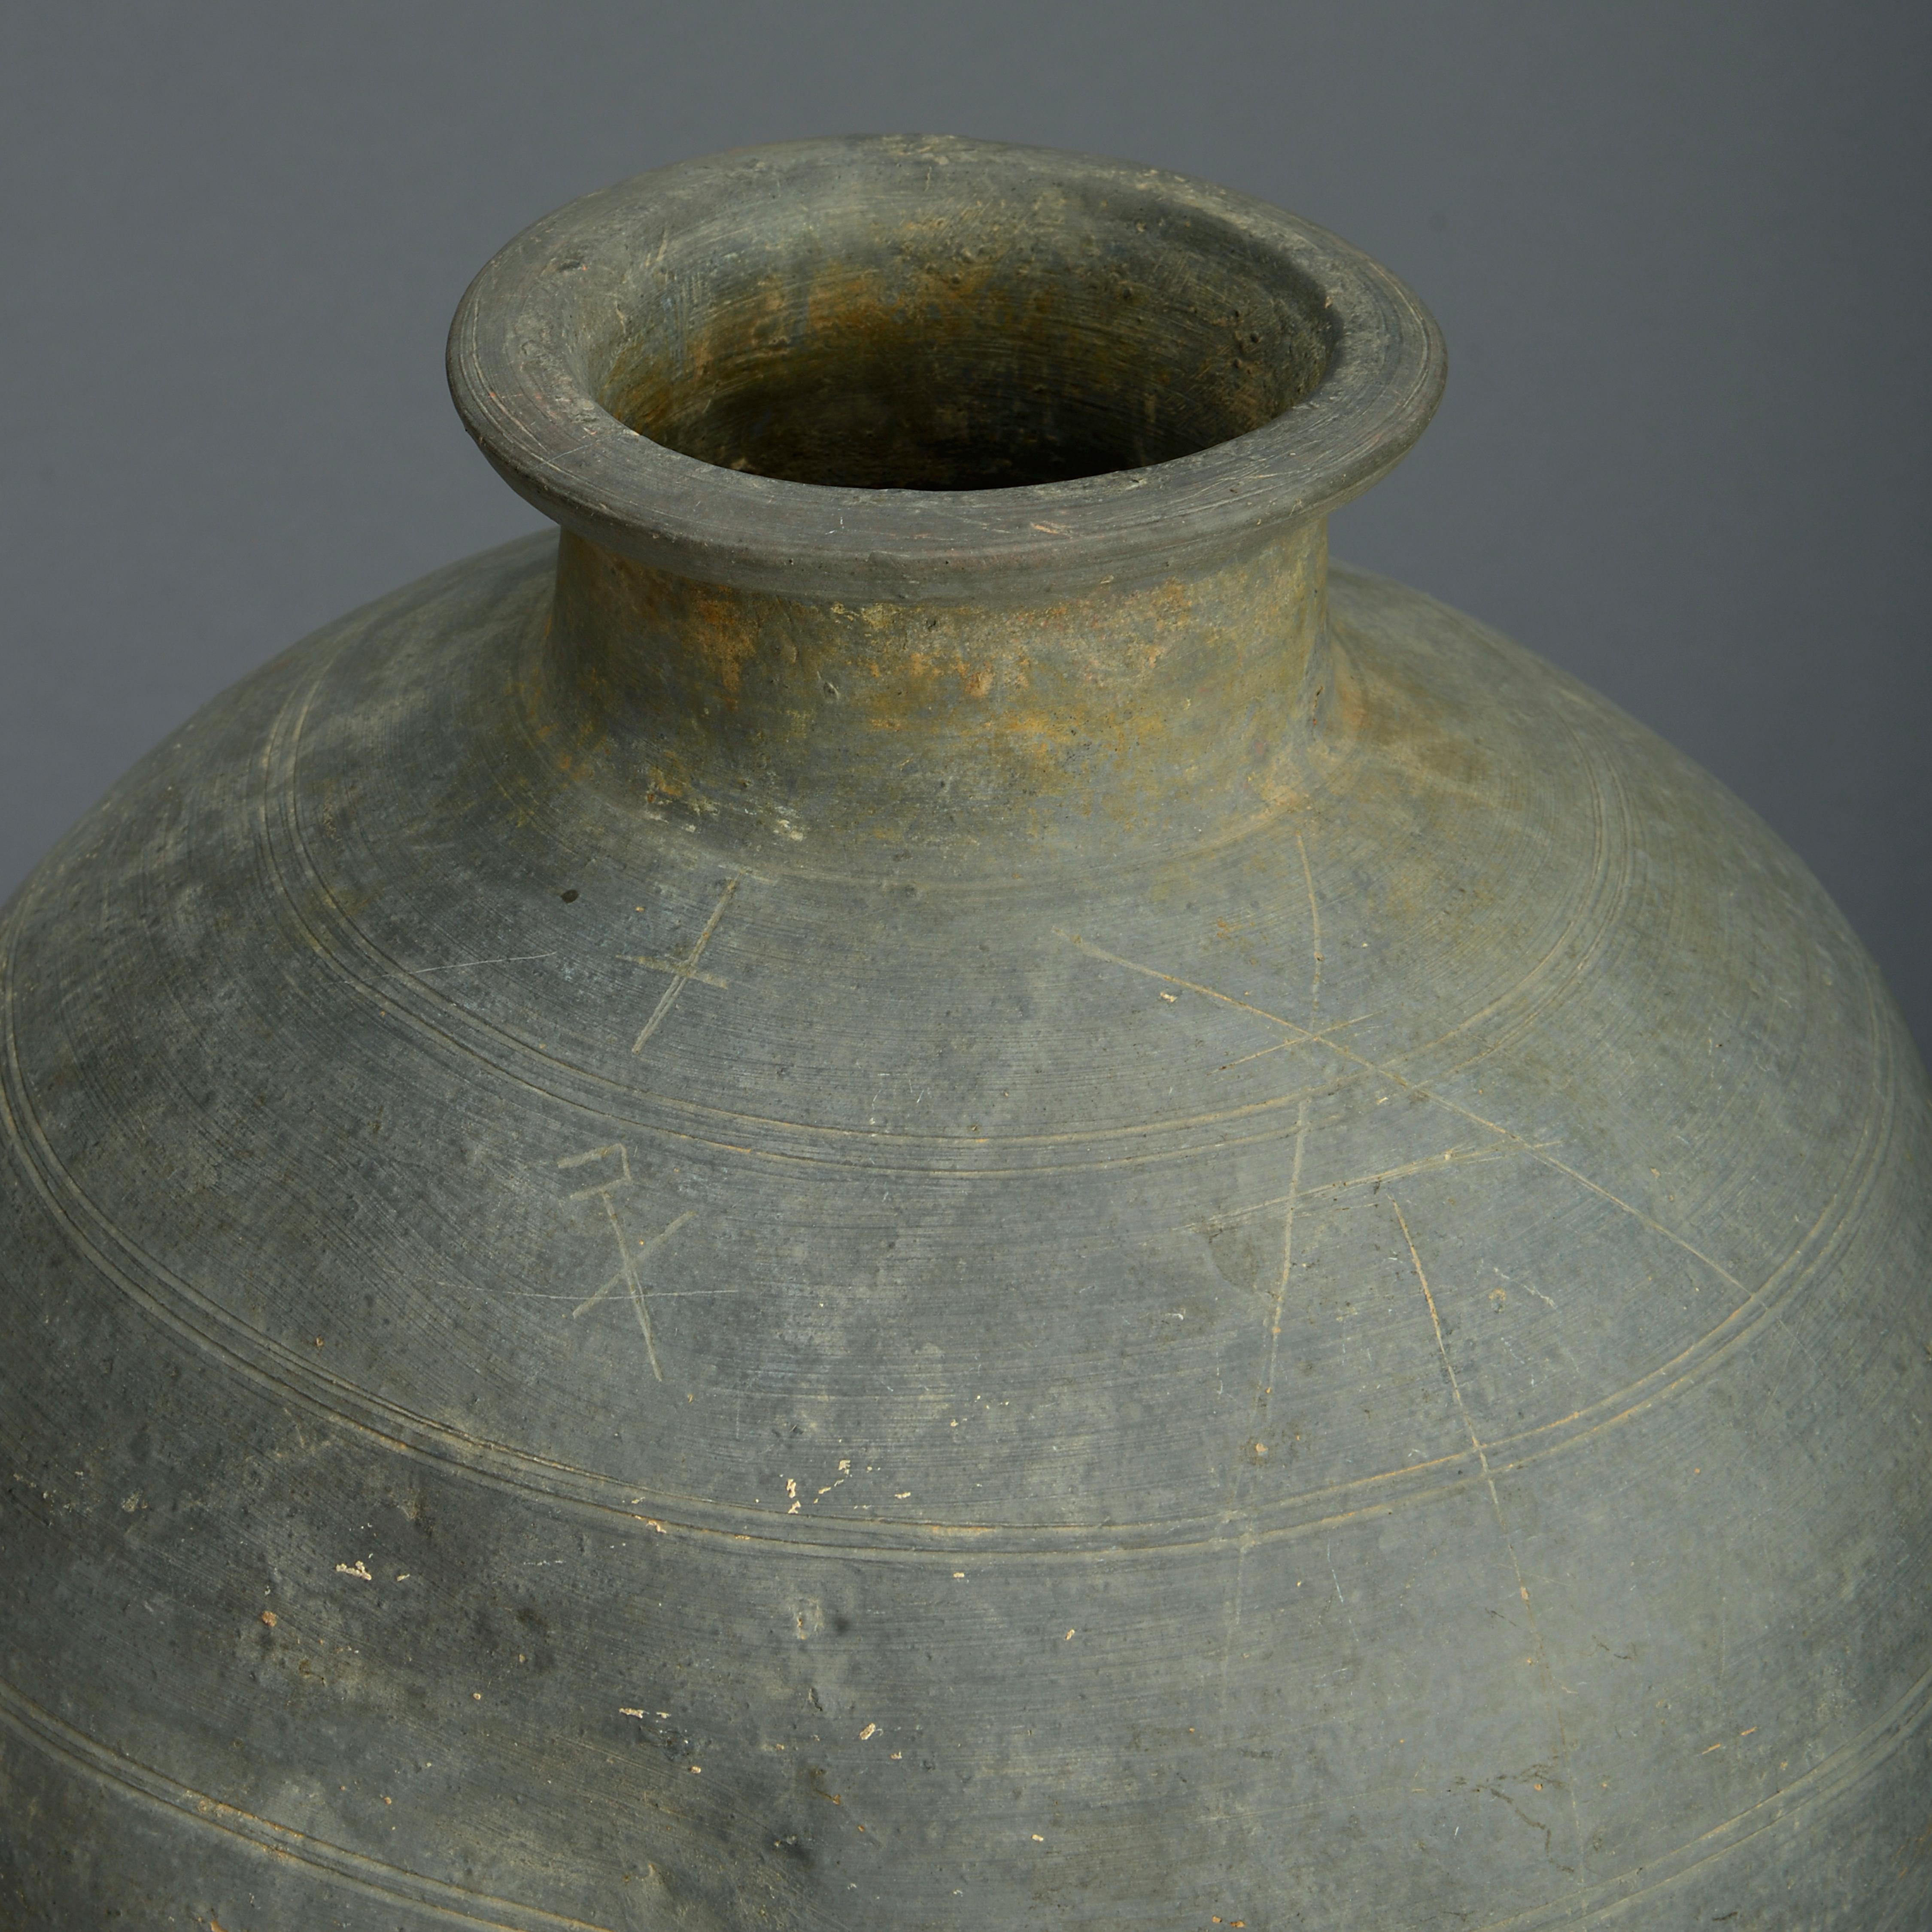 A Chinese warring states or possibly Qin grey pottery jar with incised marks.

This large and generously shaped pottery jar was made during the Warring States Period (475 – 221 BC) or possibly during the Qin Dynasty (221 – 206 BC). It is made from